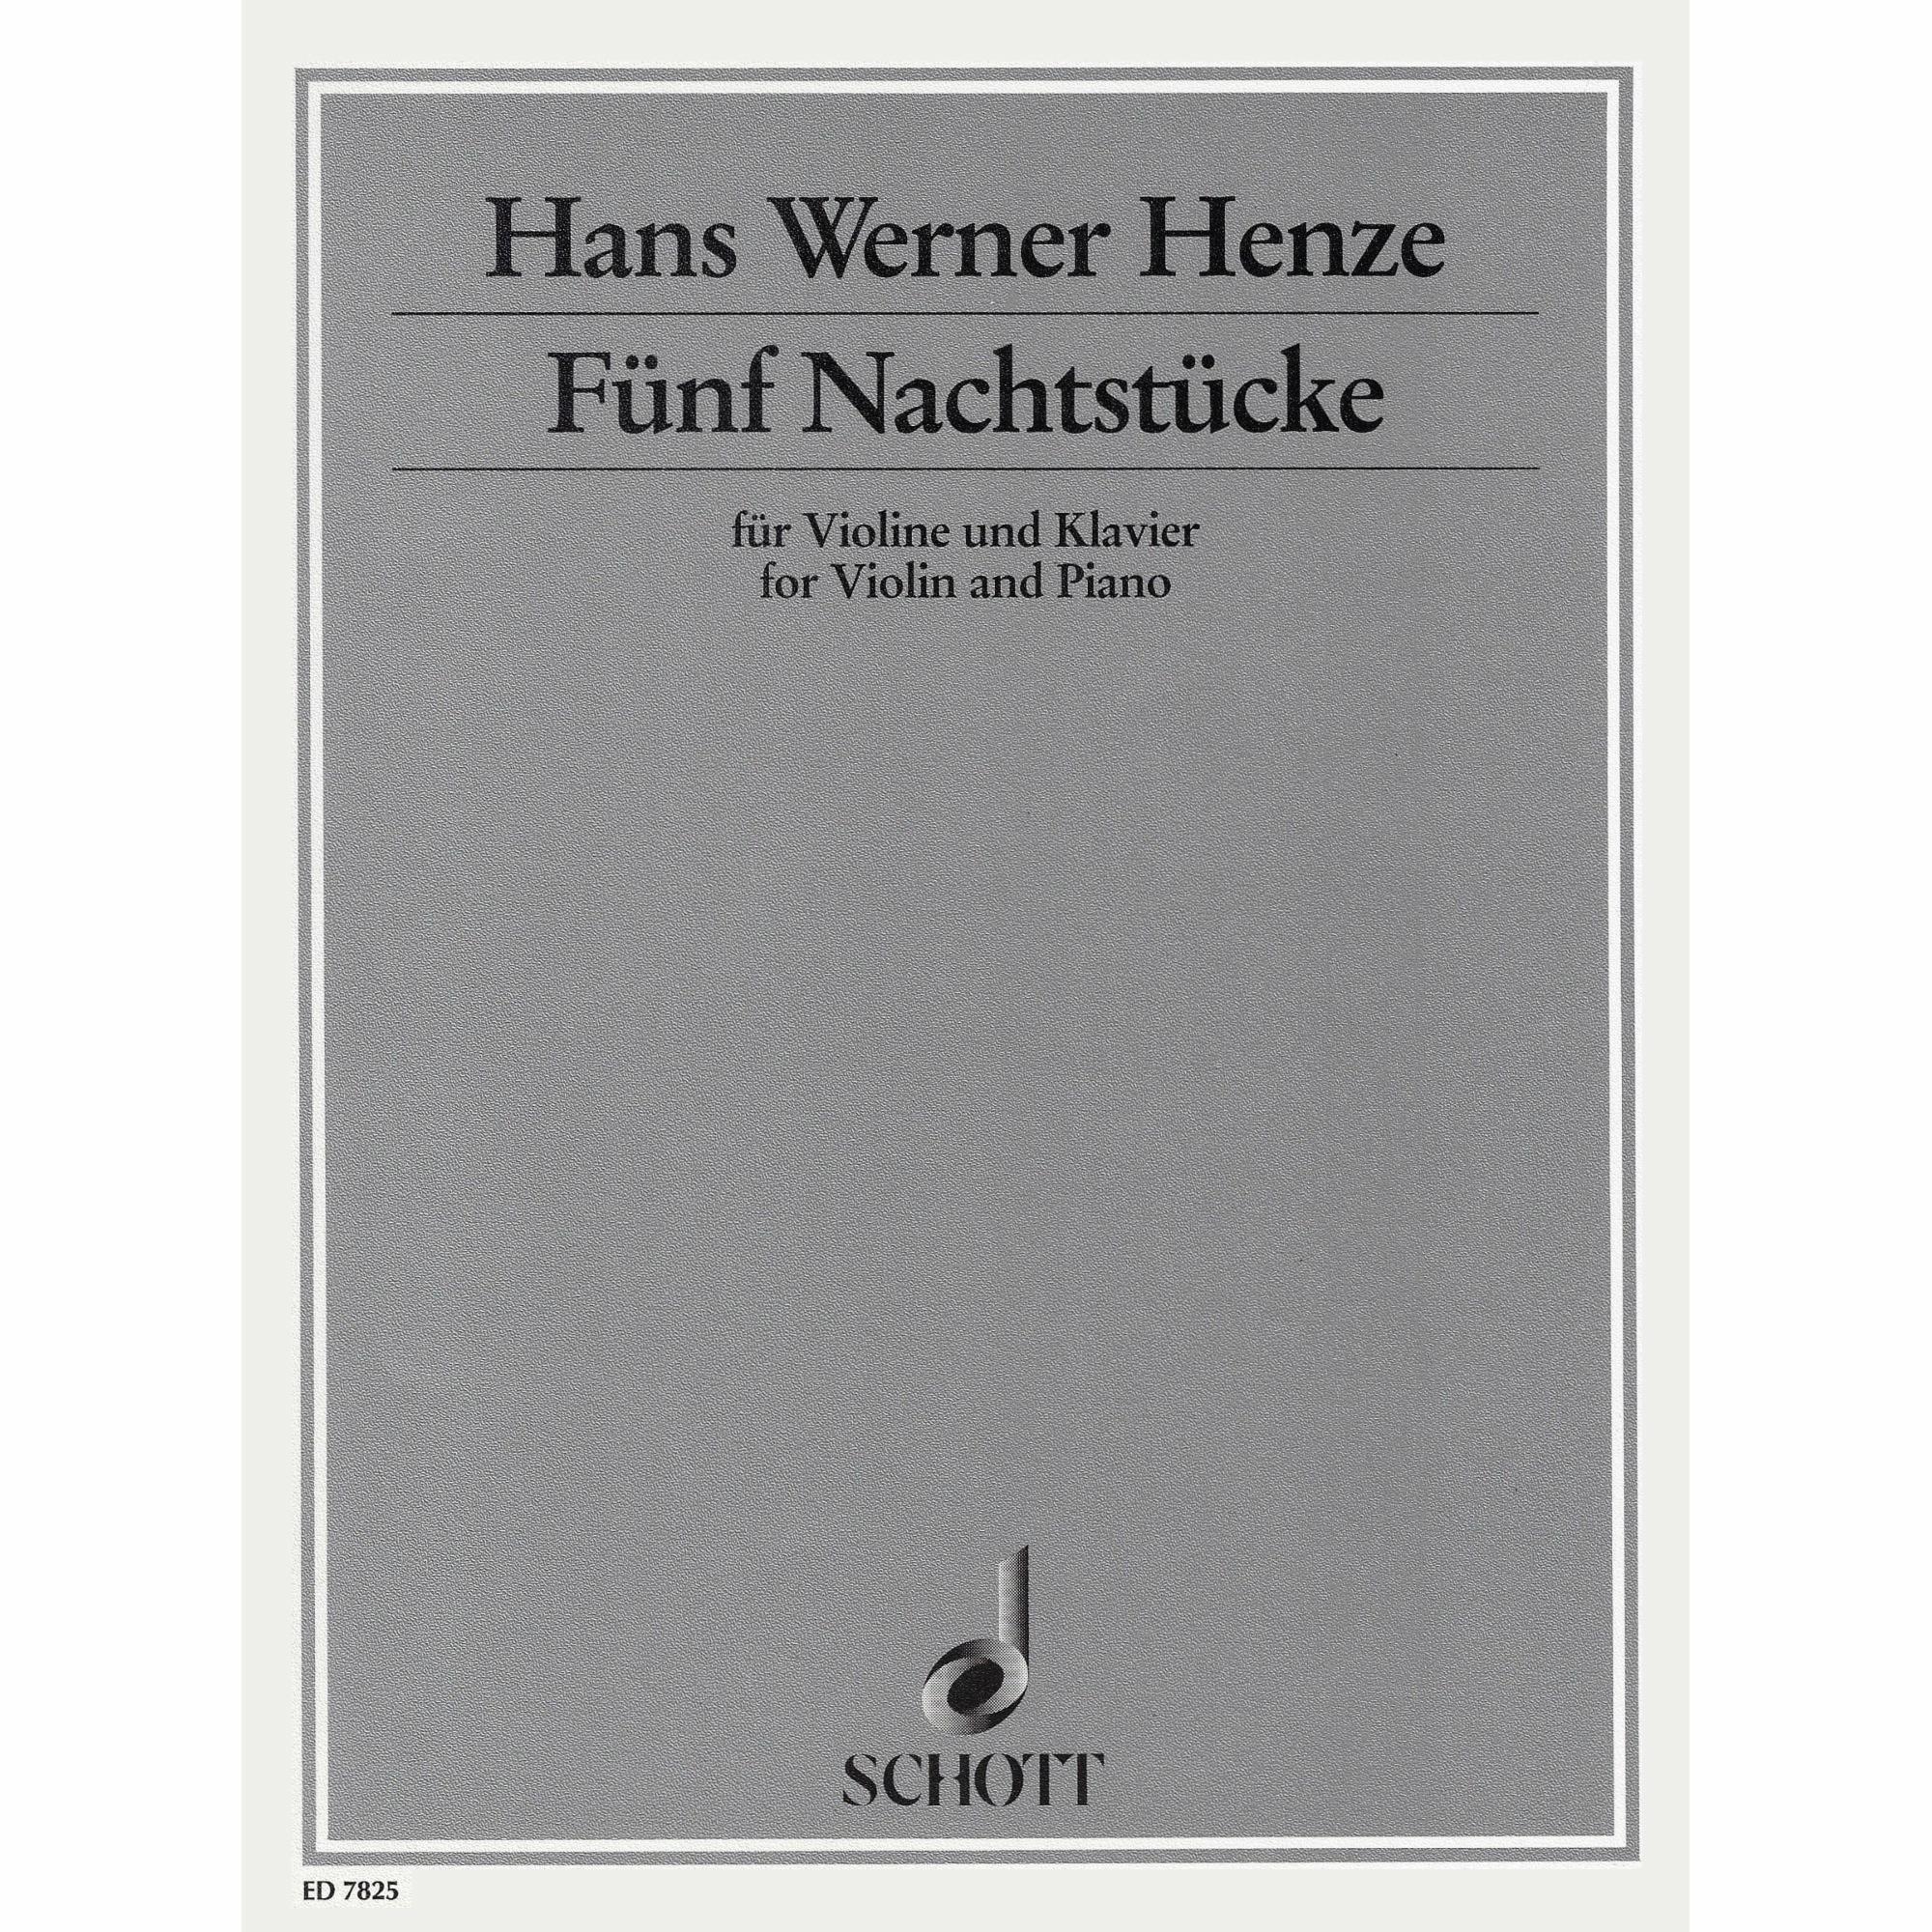 Henze -- Funf Nachtstucke for Violin and Piano